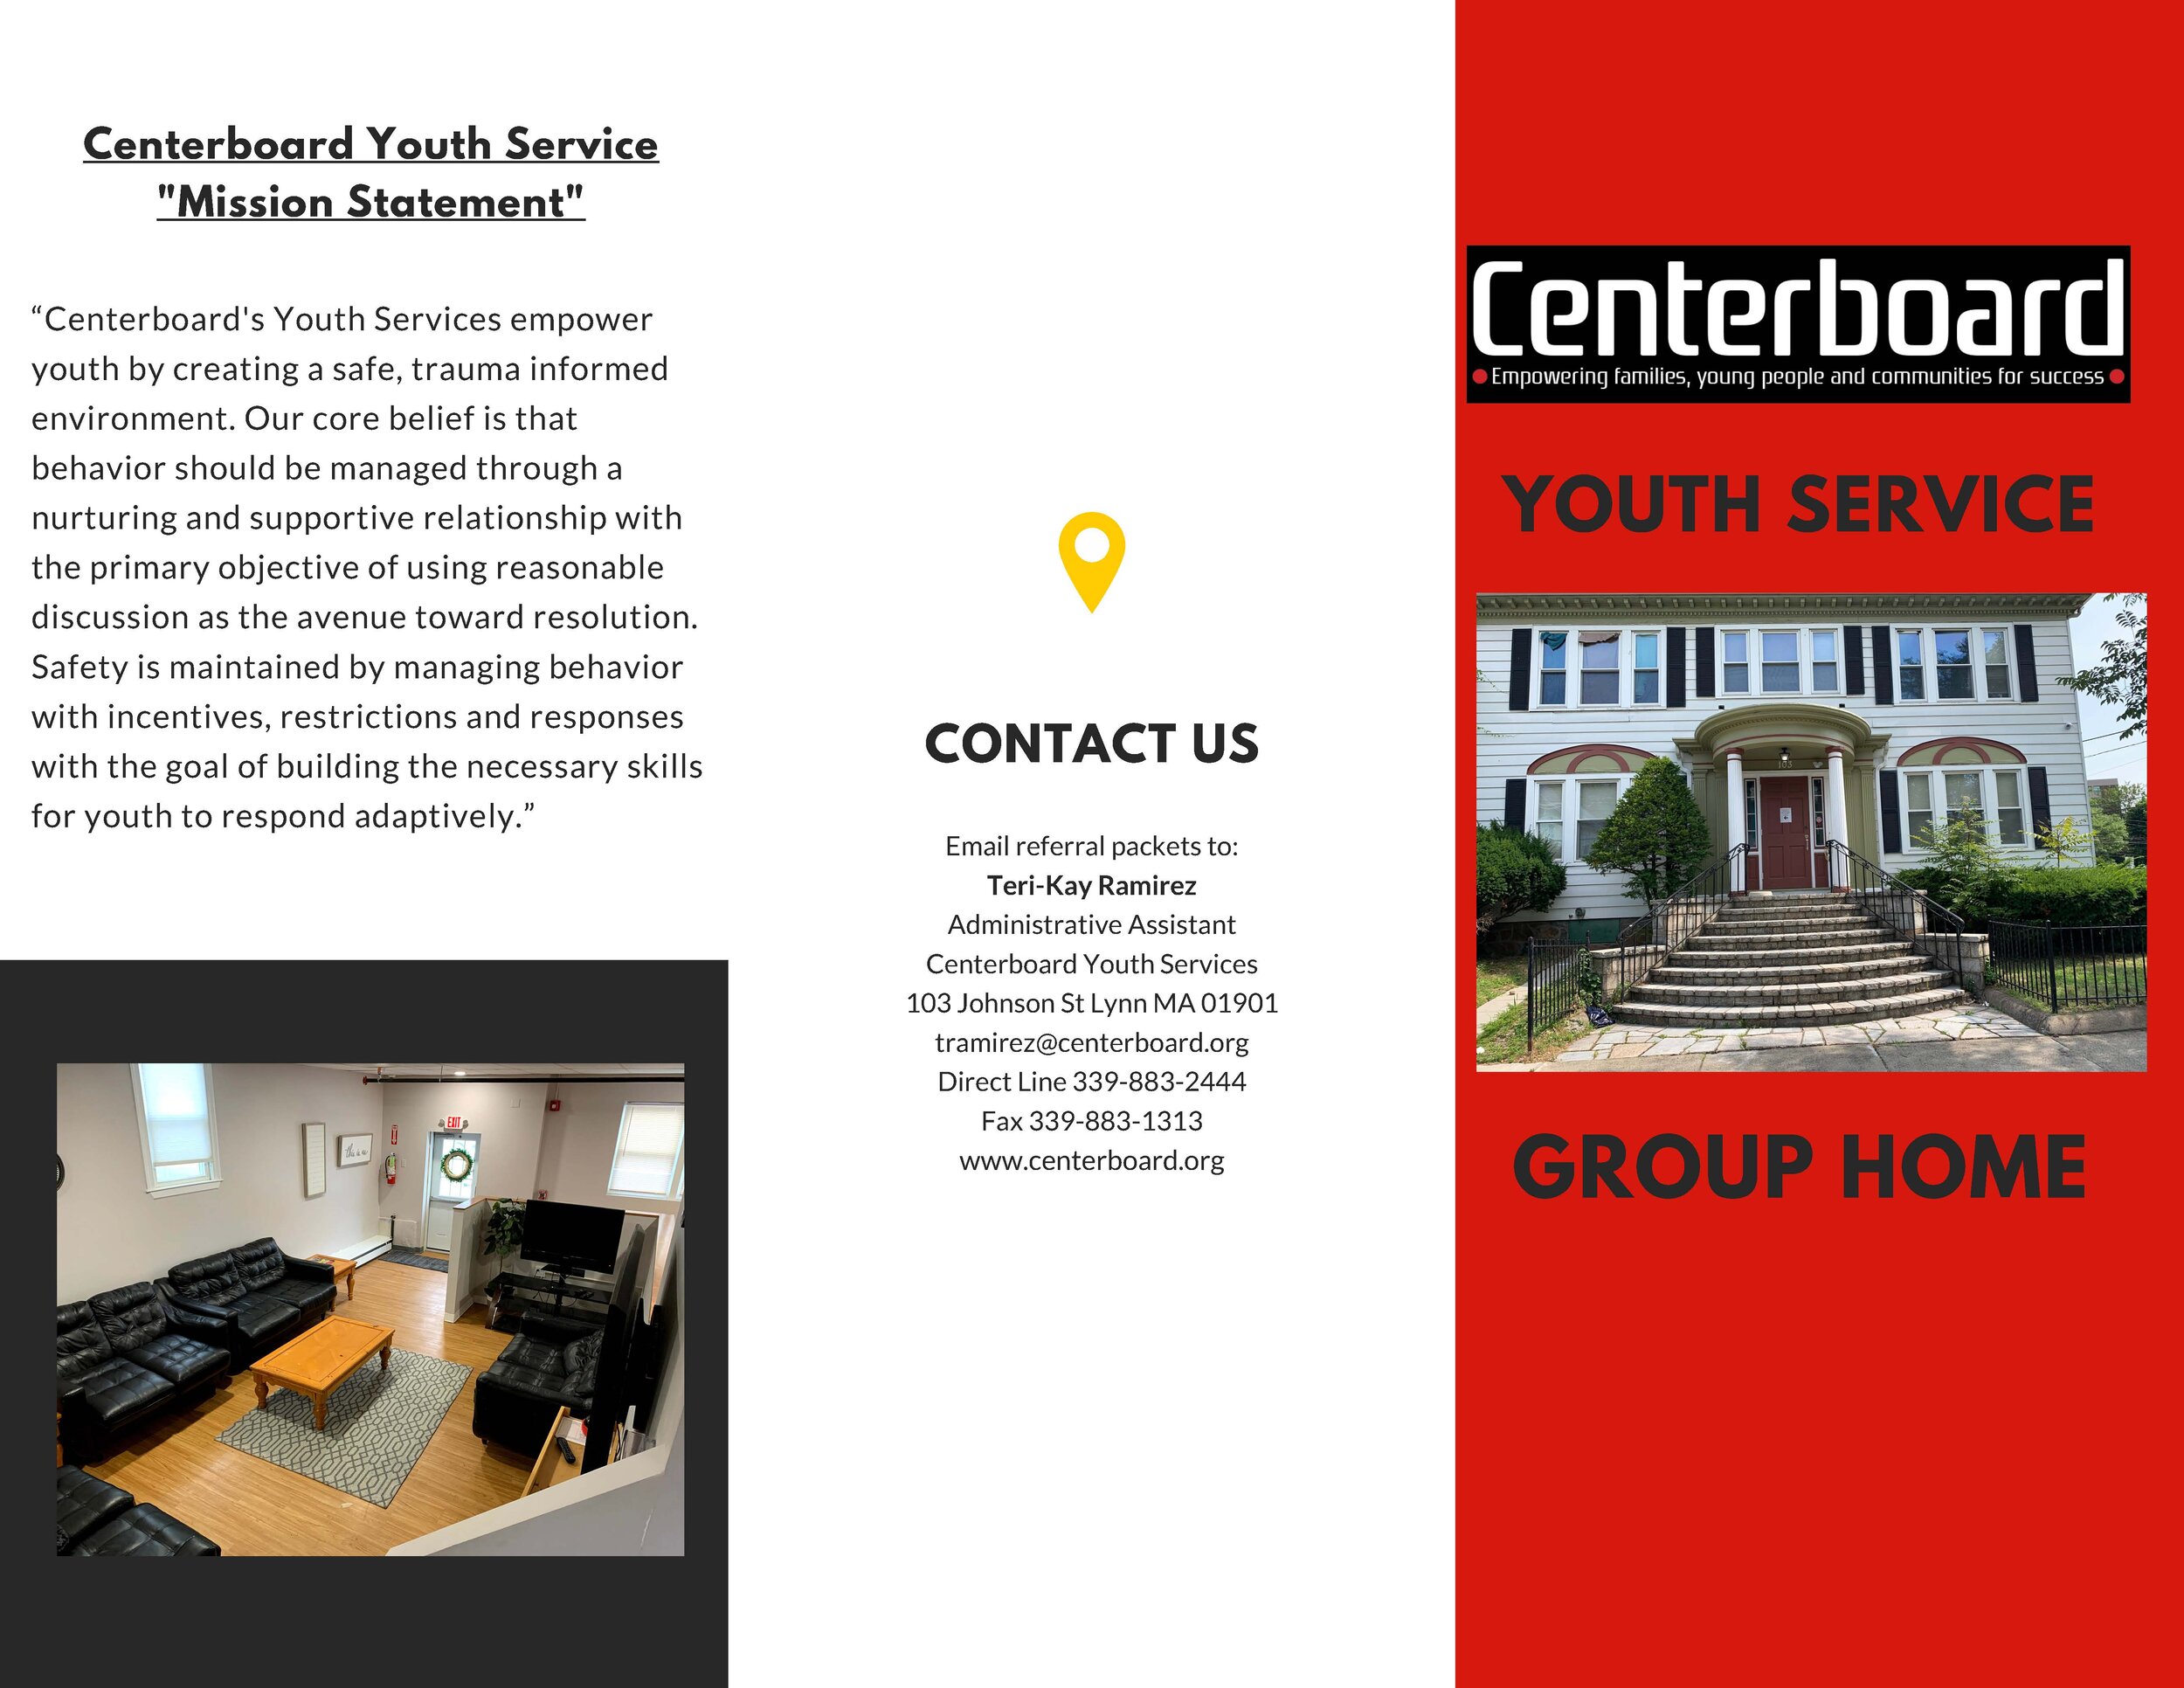 Download the Group Home brochure